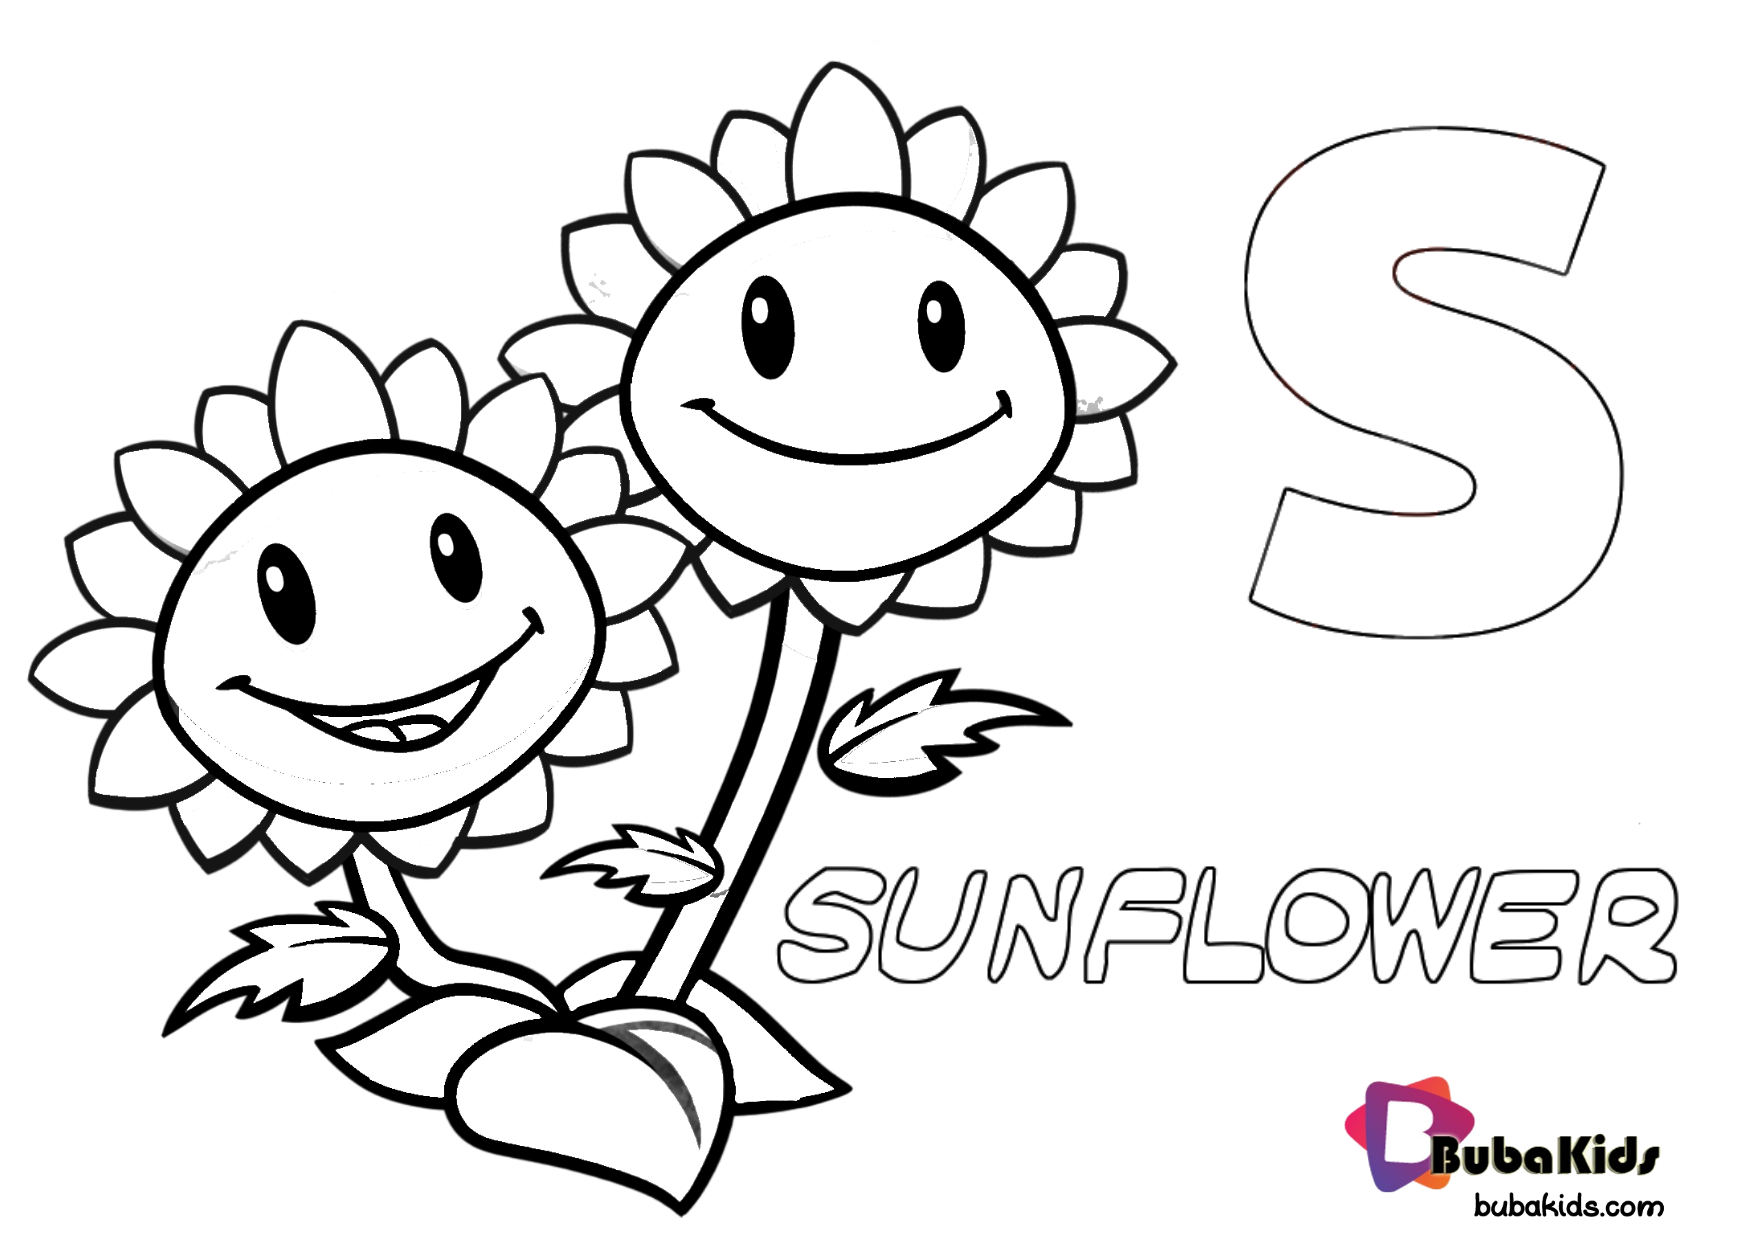 Print and color this free letter S and cute sunflower coloring page for toddlers. Wallpaper